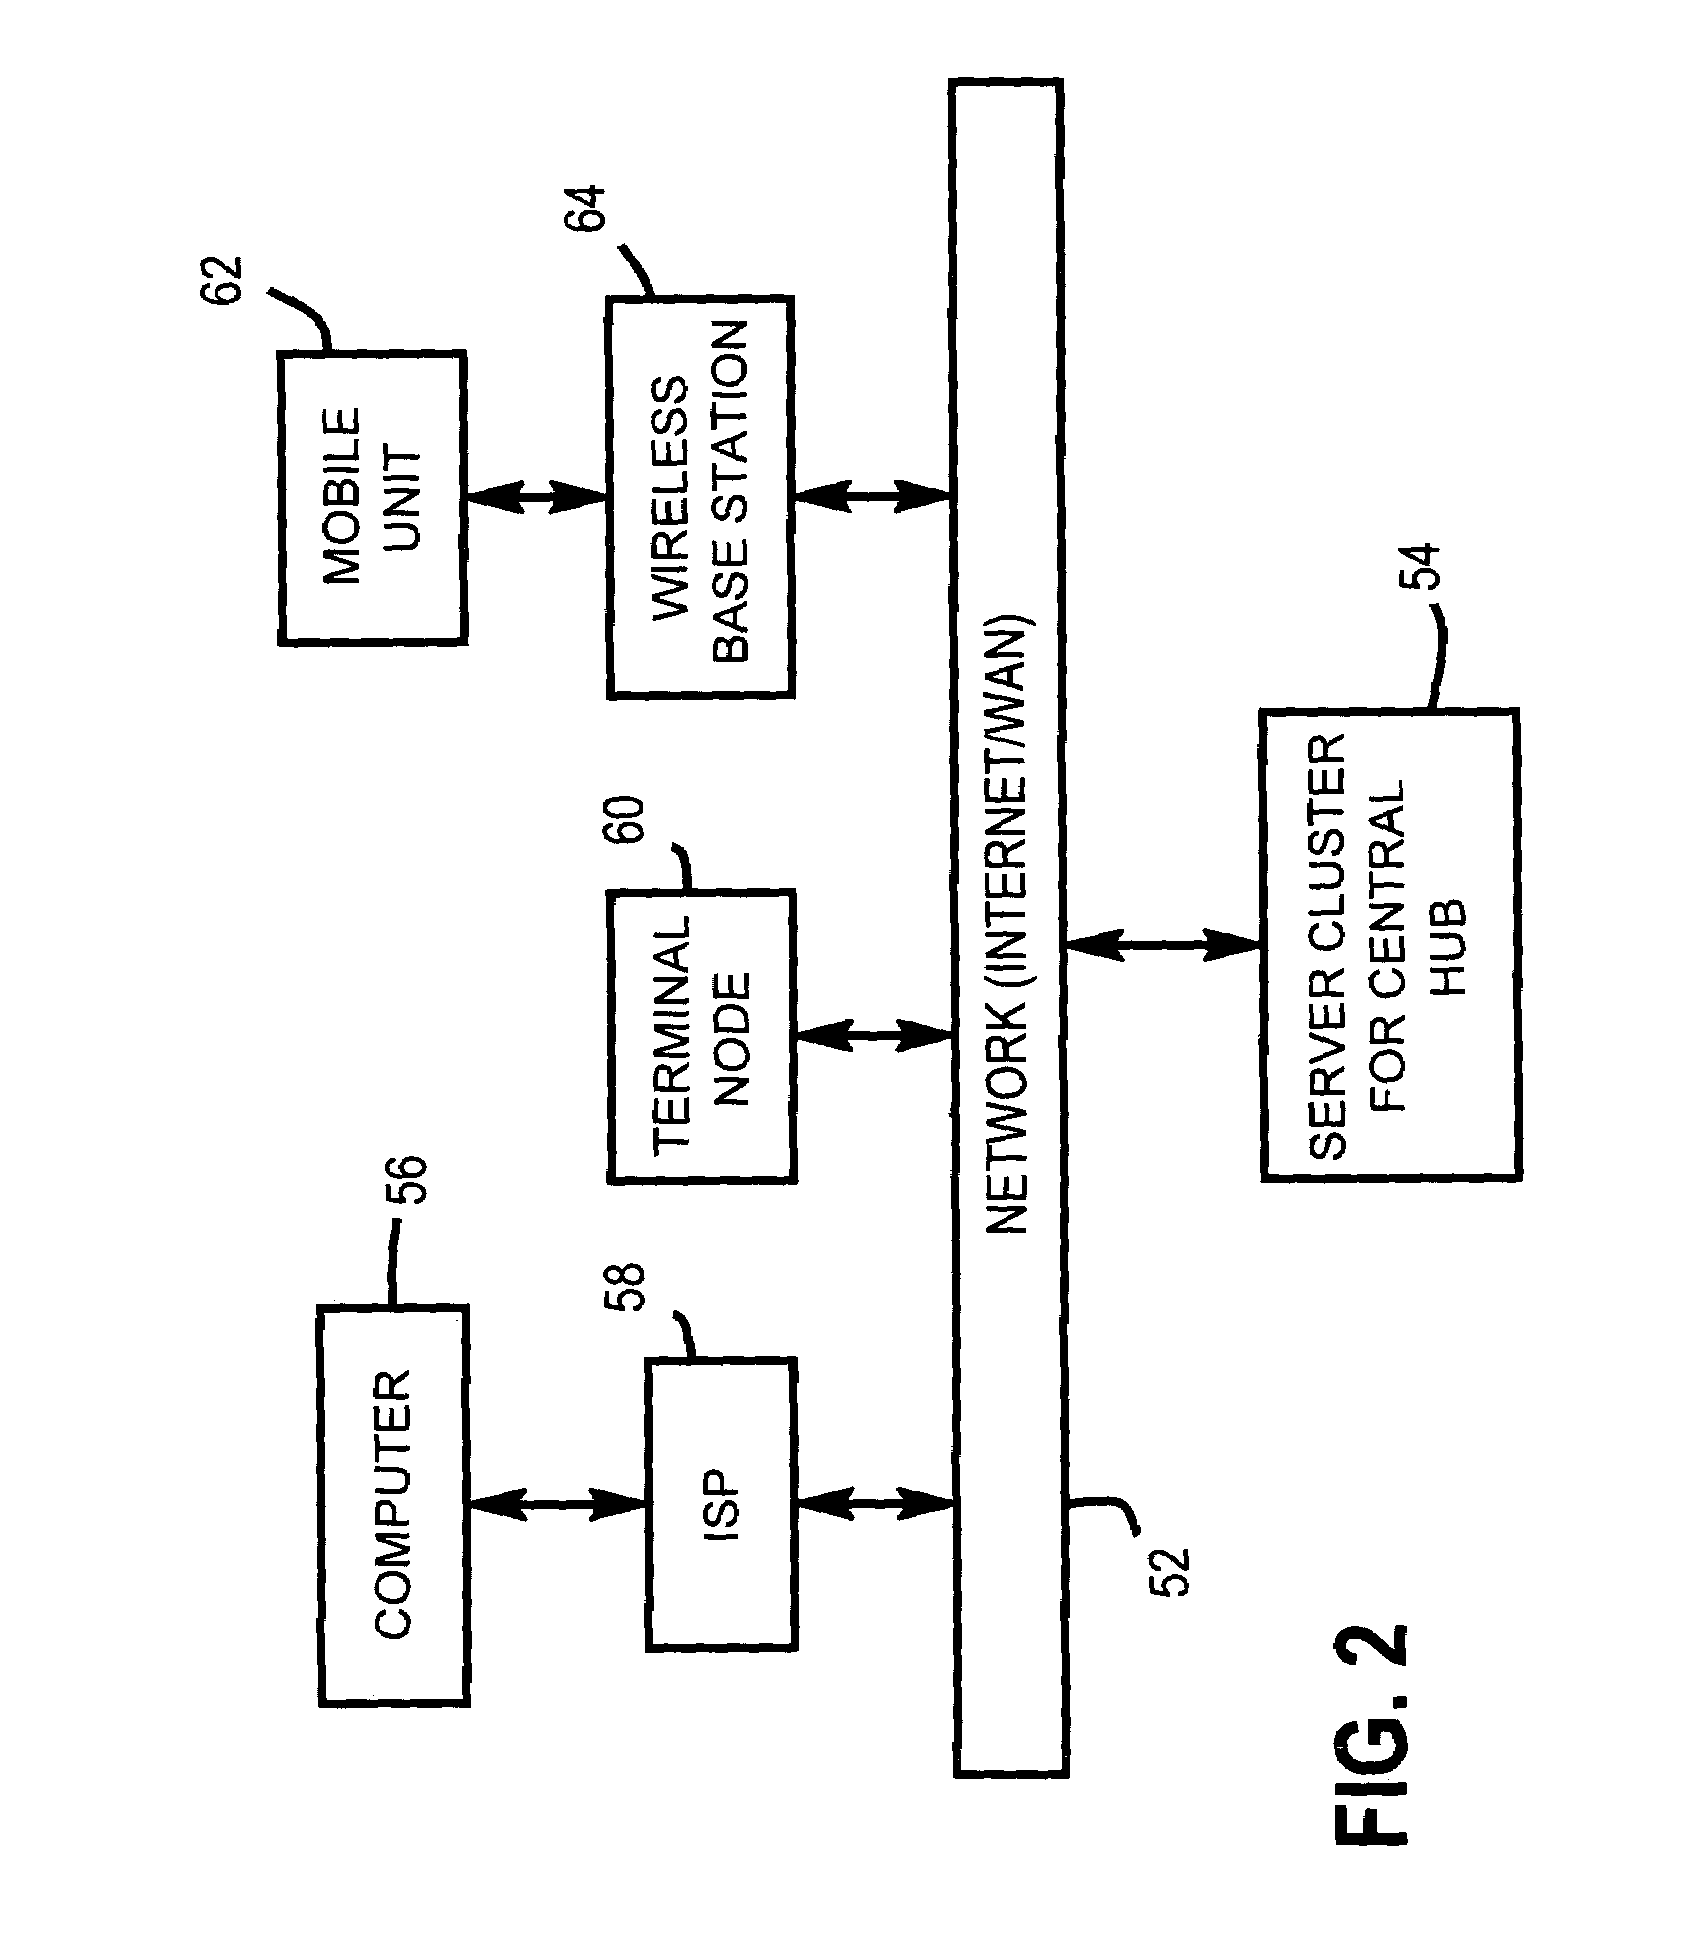 Apparatuses for requesting, retrieving and storing contact records